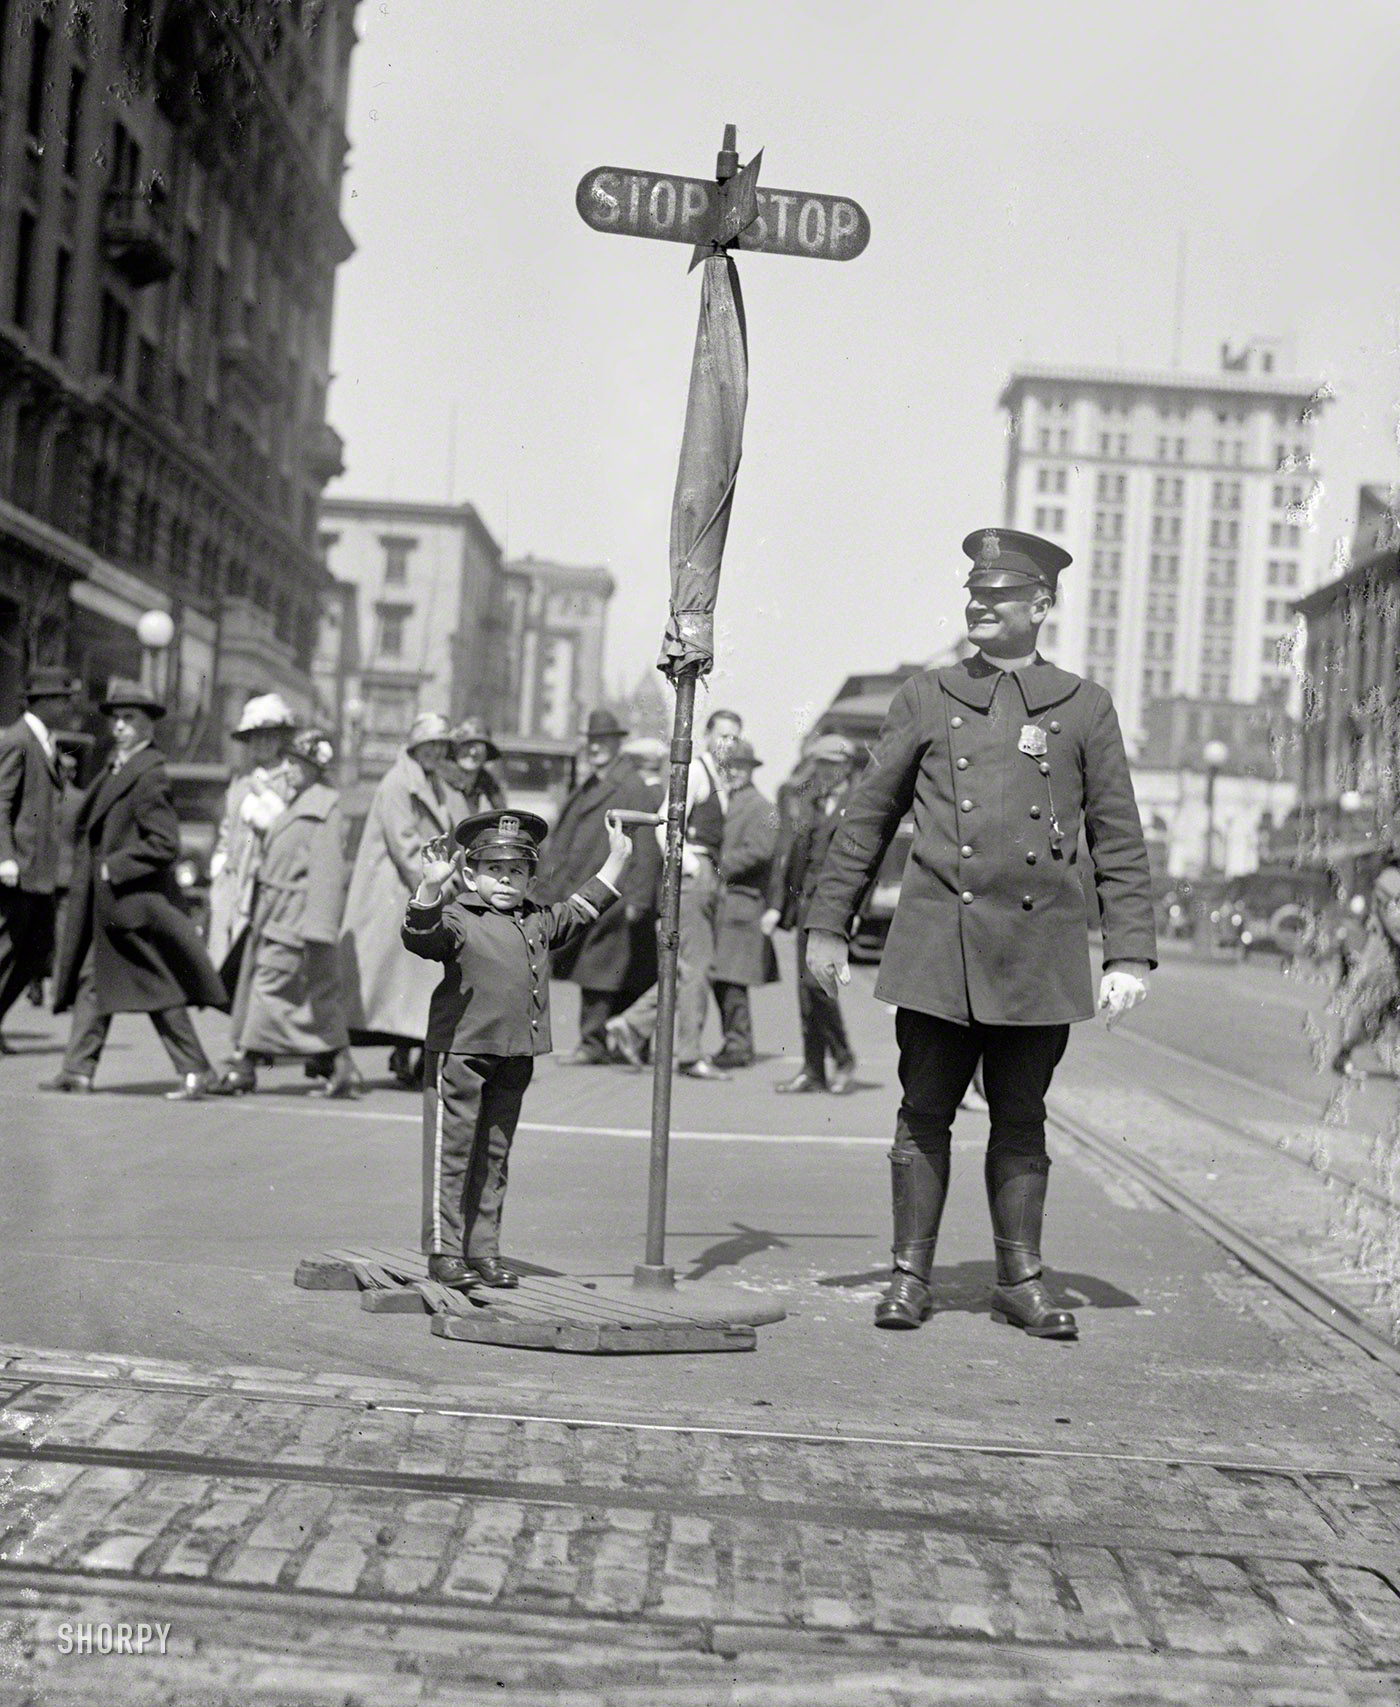 April 8, 1924. Washington, D.C. "Julius Daranyi, midget traffic cop." From the Washington Post: "Julius Daranyi, one of the stars with Singer's midgets playing at B.F. Keith's theater this week, will become a member of the District of Columbia police force today and take up his first detail at Fourteenth and G streets, at 12:30 o’clock, where he will direct traffic." National Photo Co. View full size.